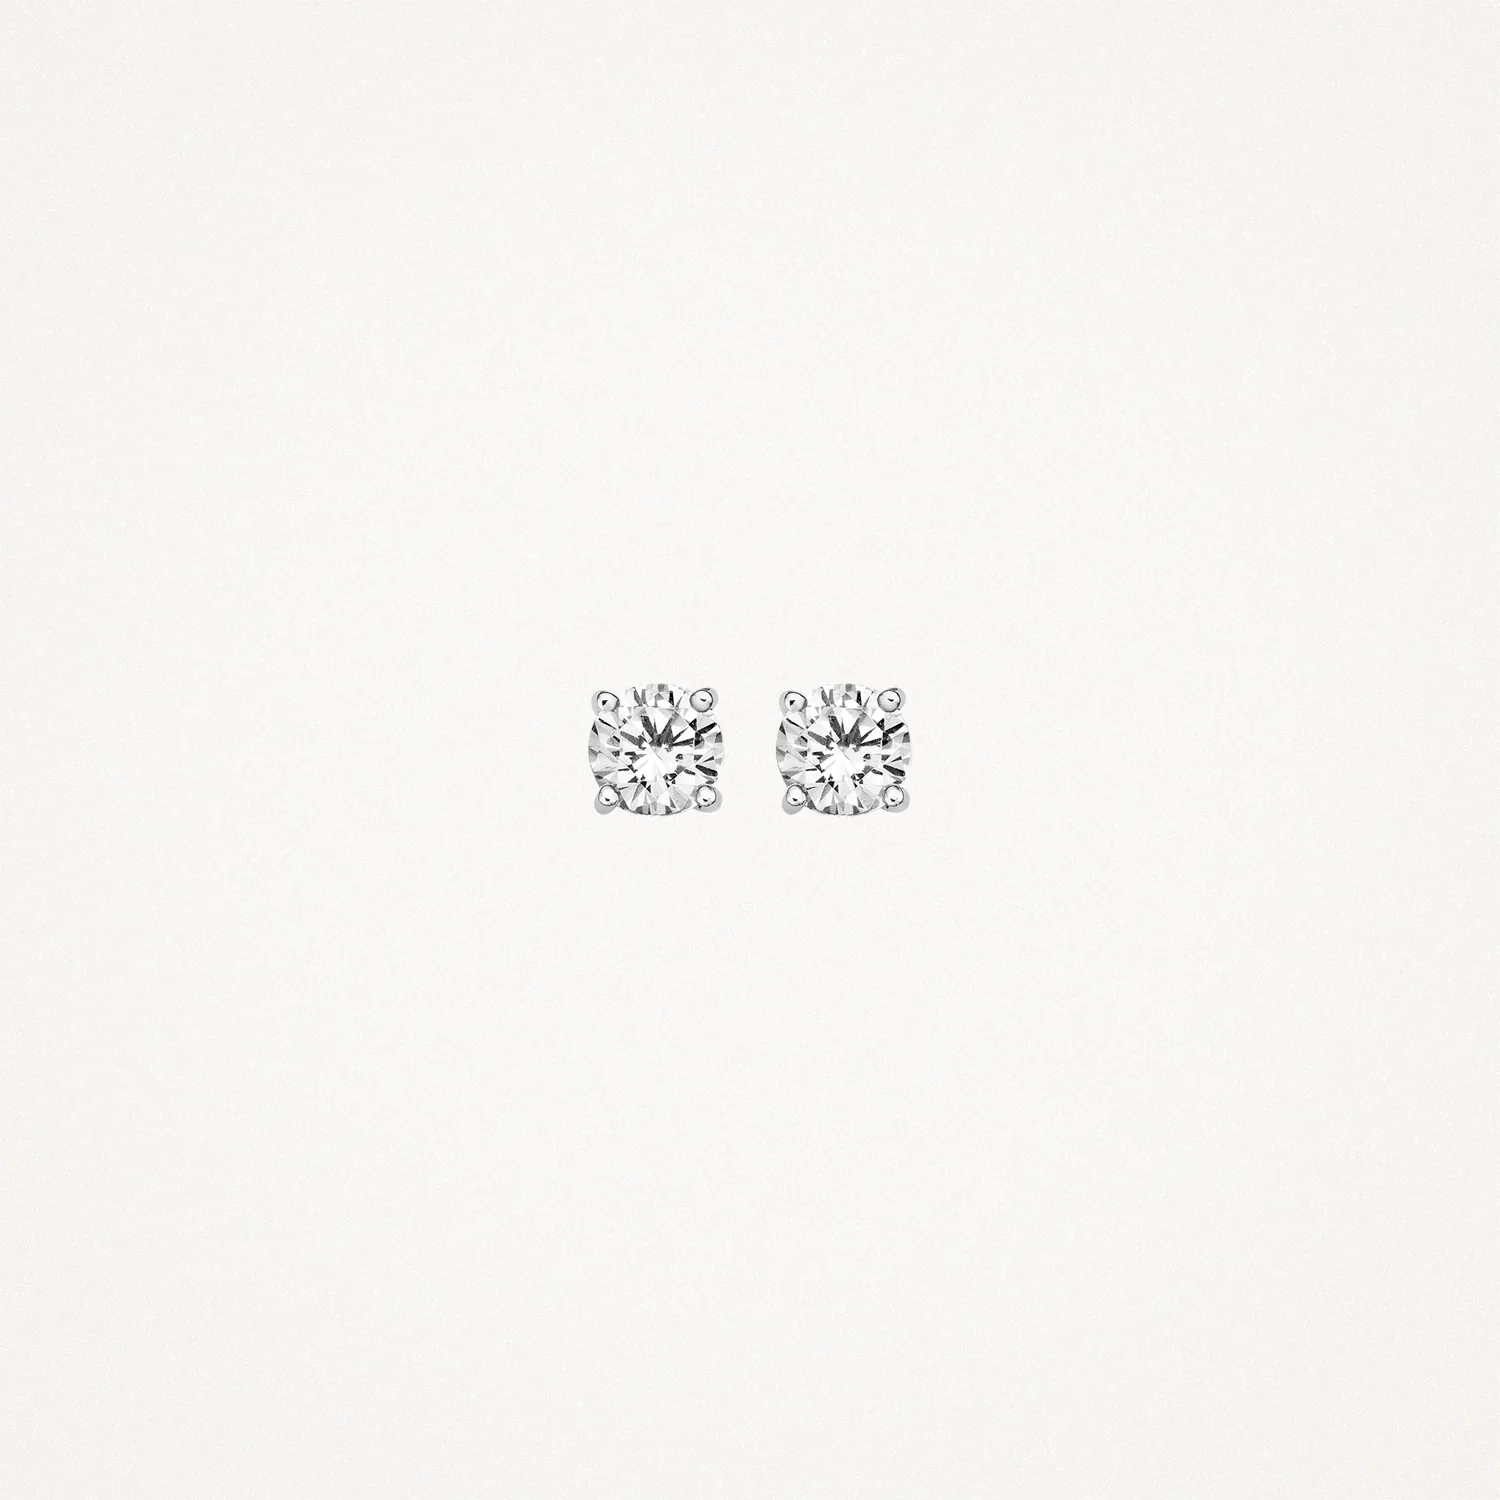 Blush White Gold & Claw-Set CZ Stud Earrings - Very Small